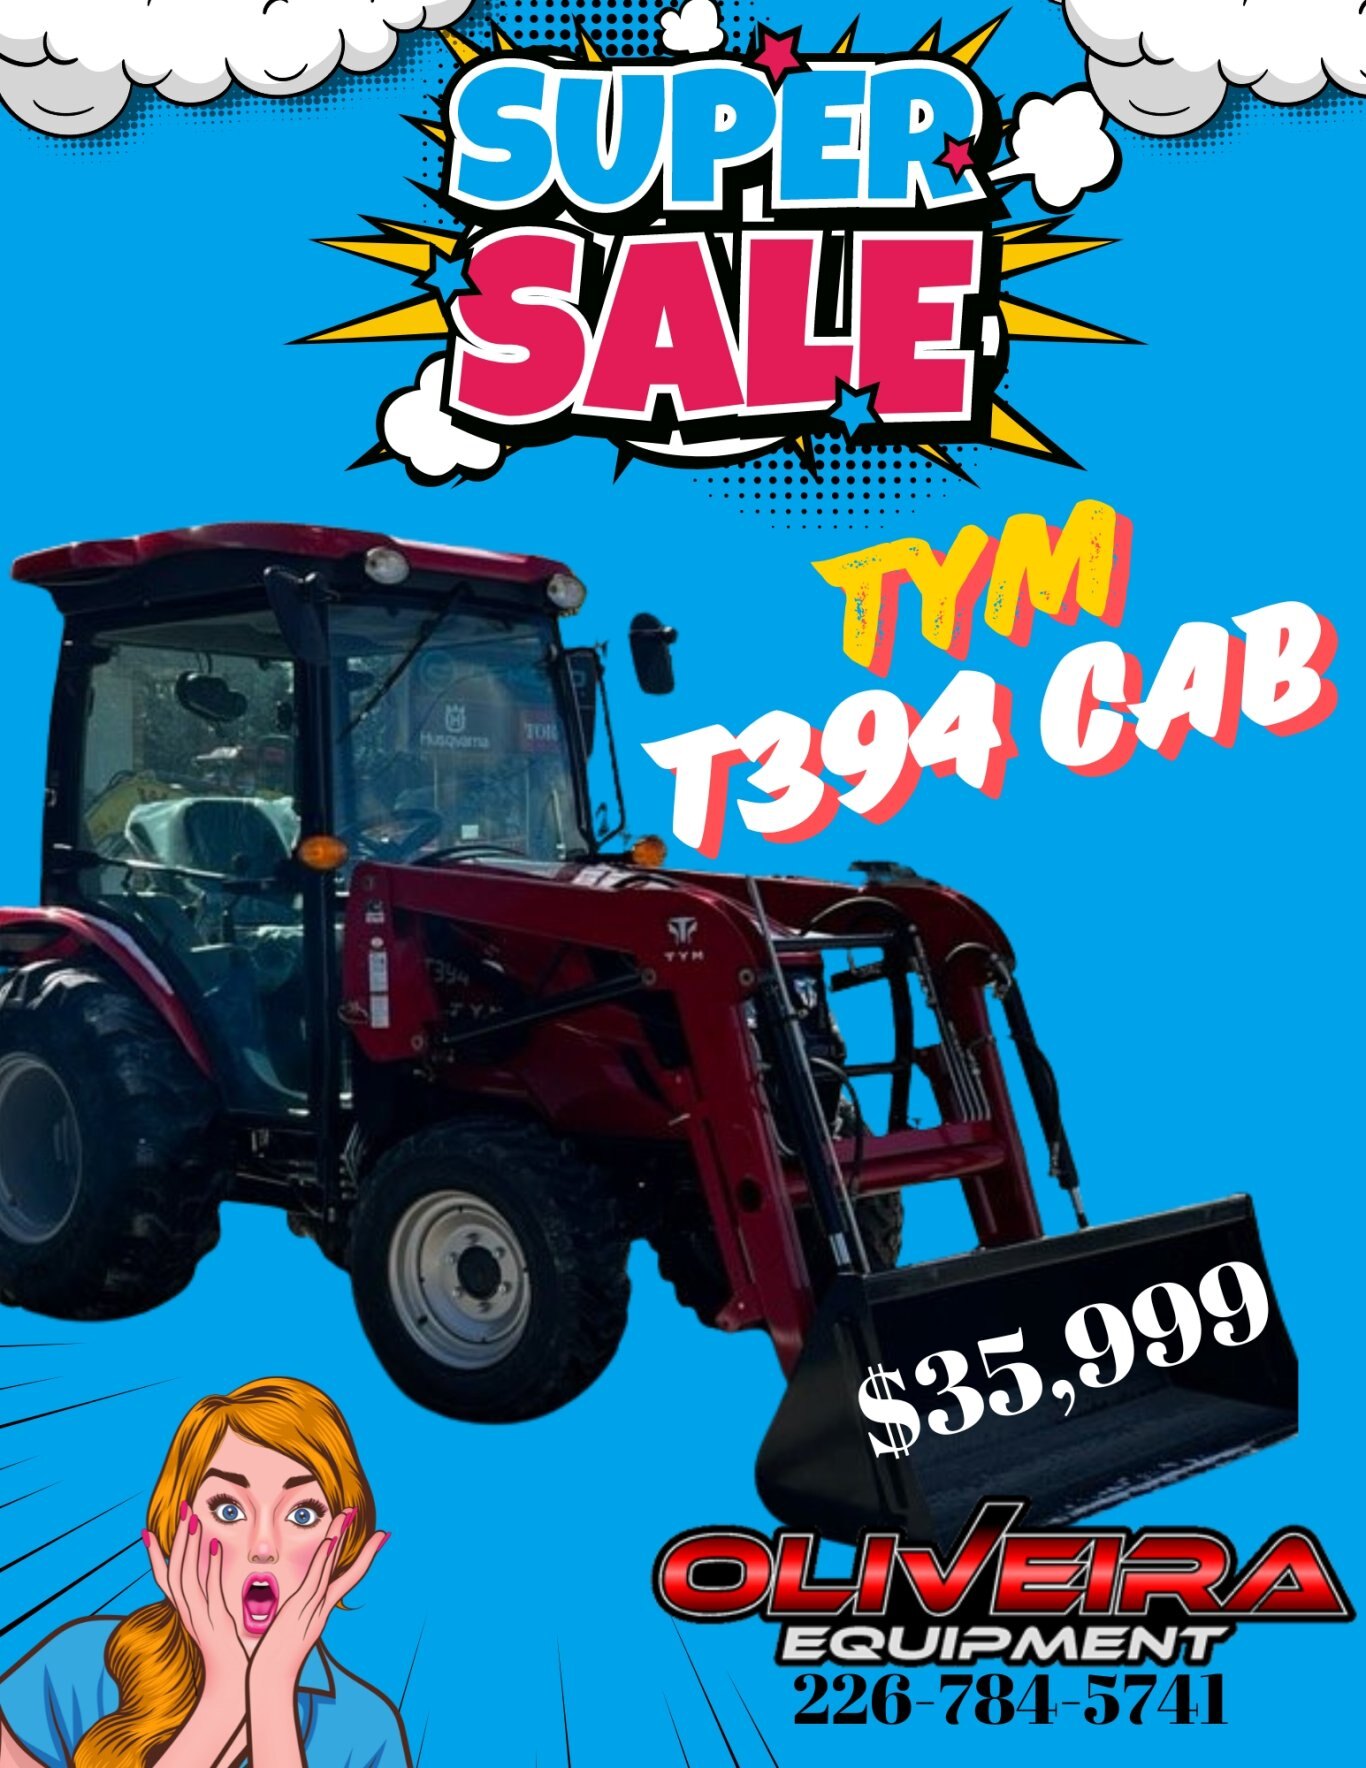 TYM Tractors T394 Cab HST Cab Loader